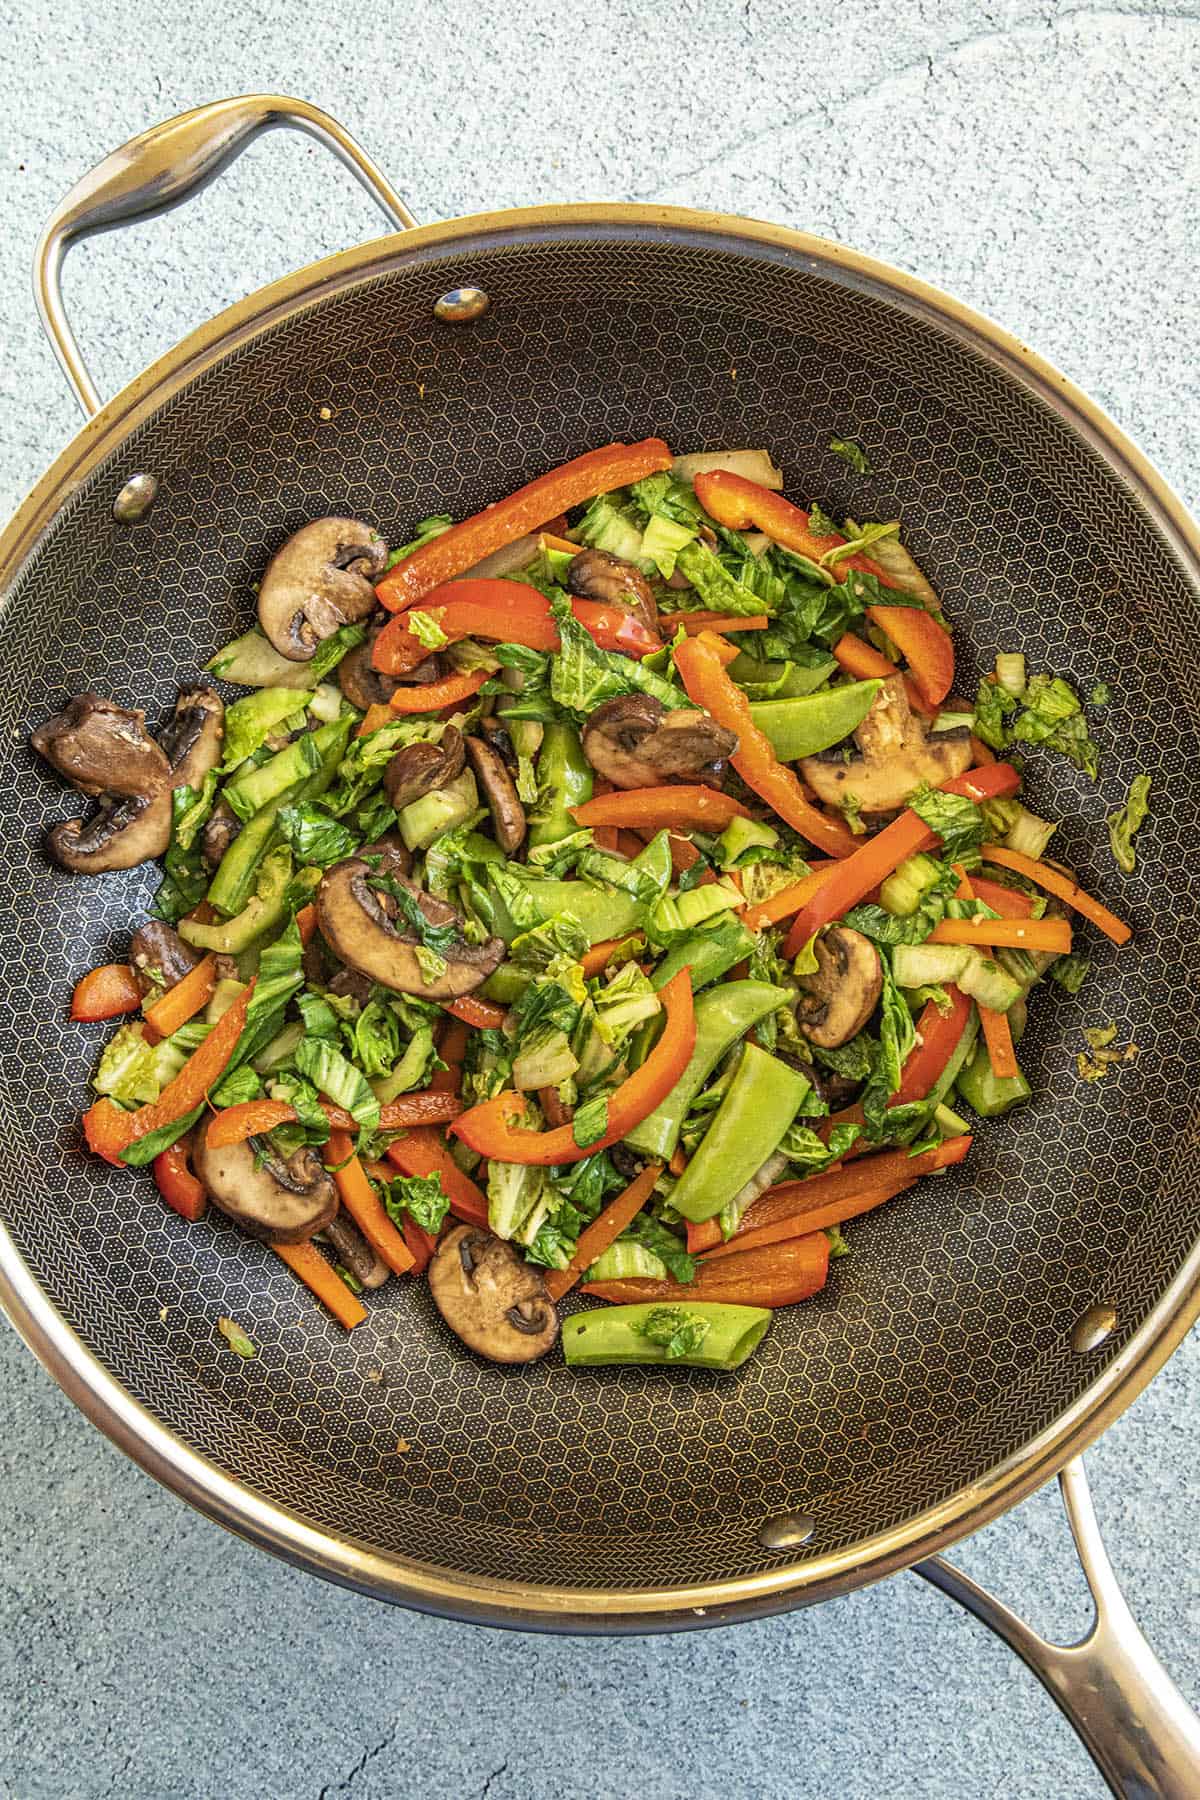 Stir frying the second round of vegetables in a hot pan